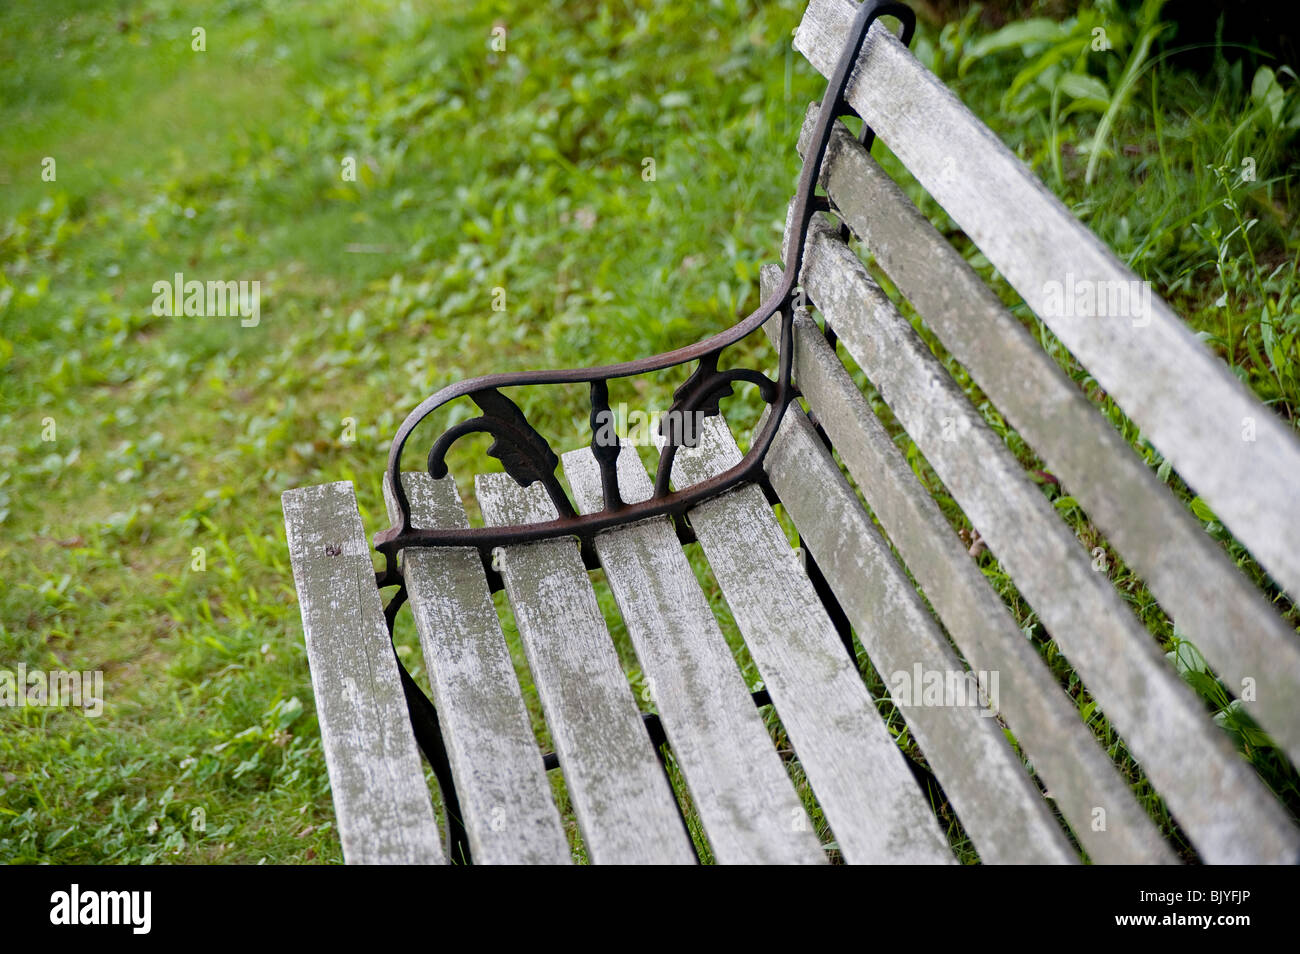 Wooden bench in a park Stock Photo